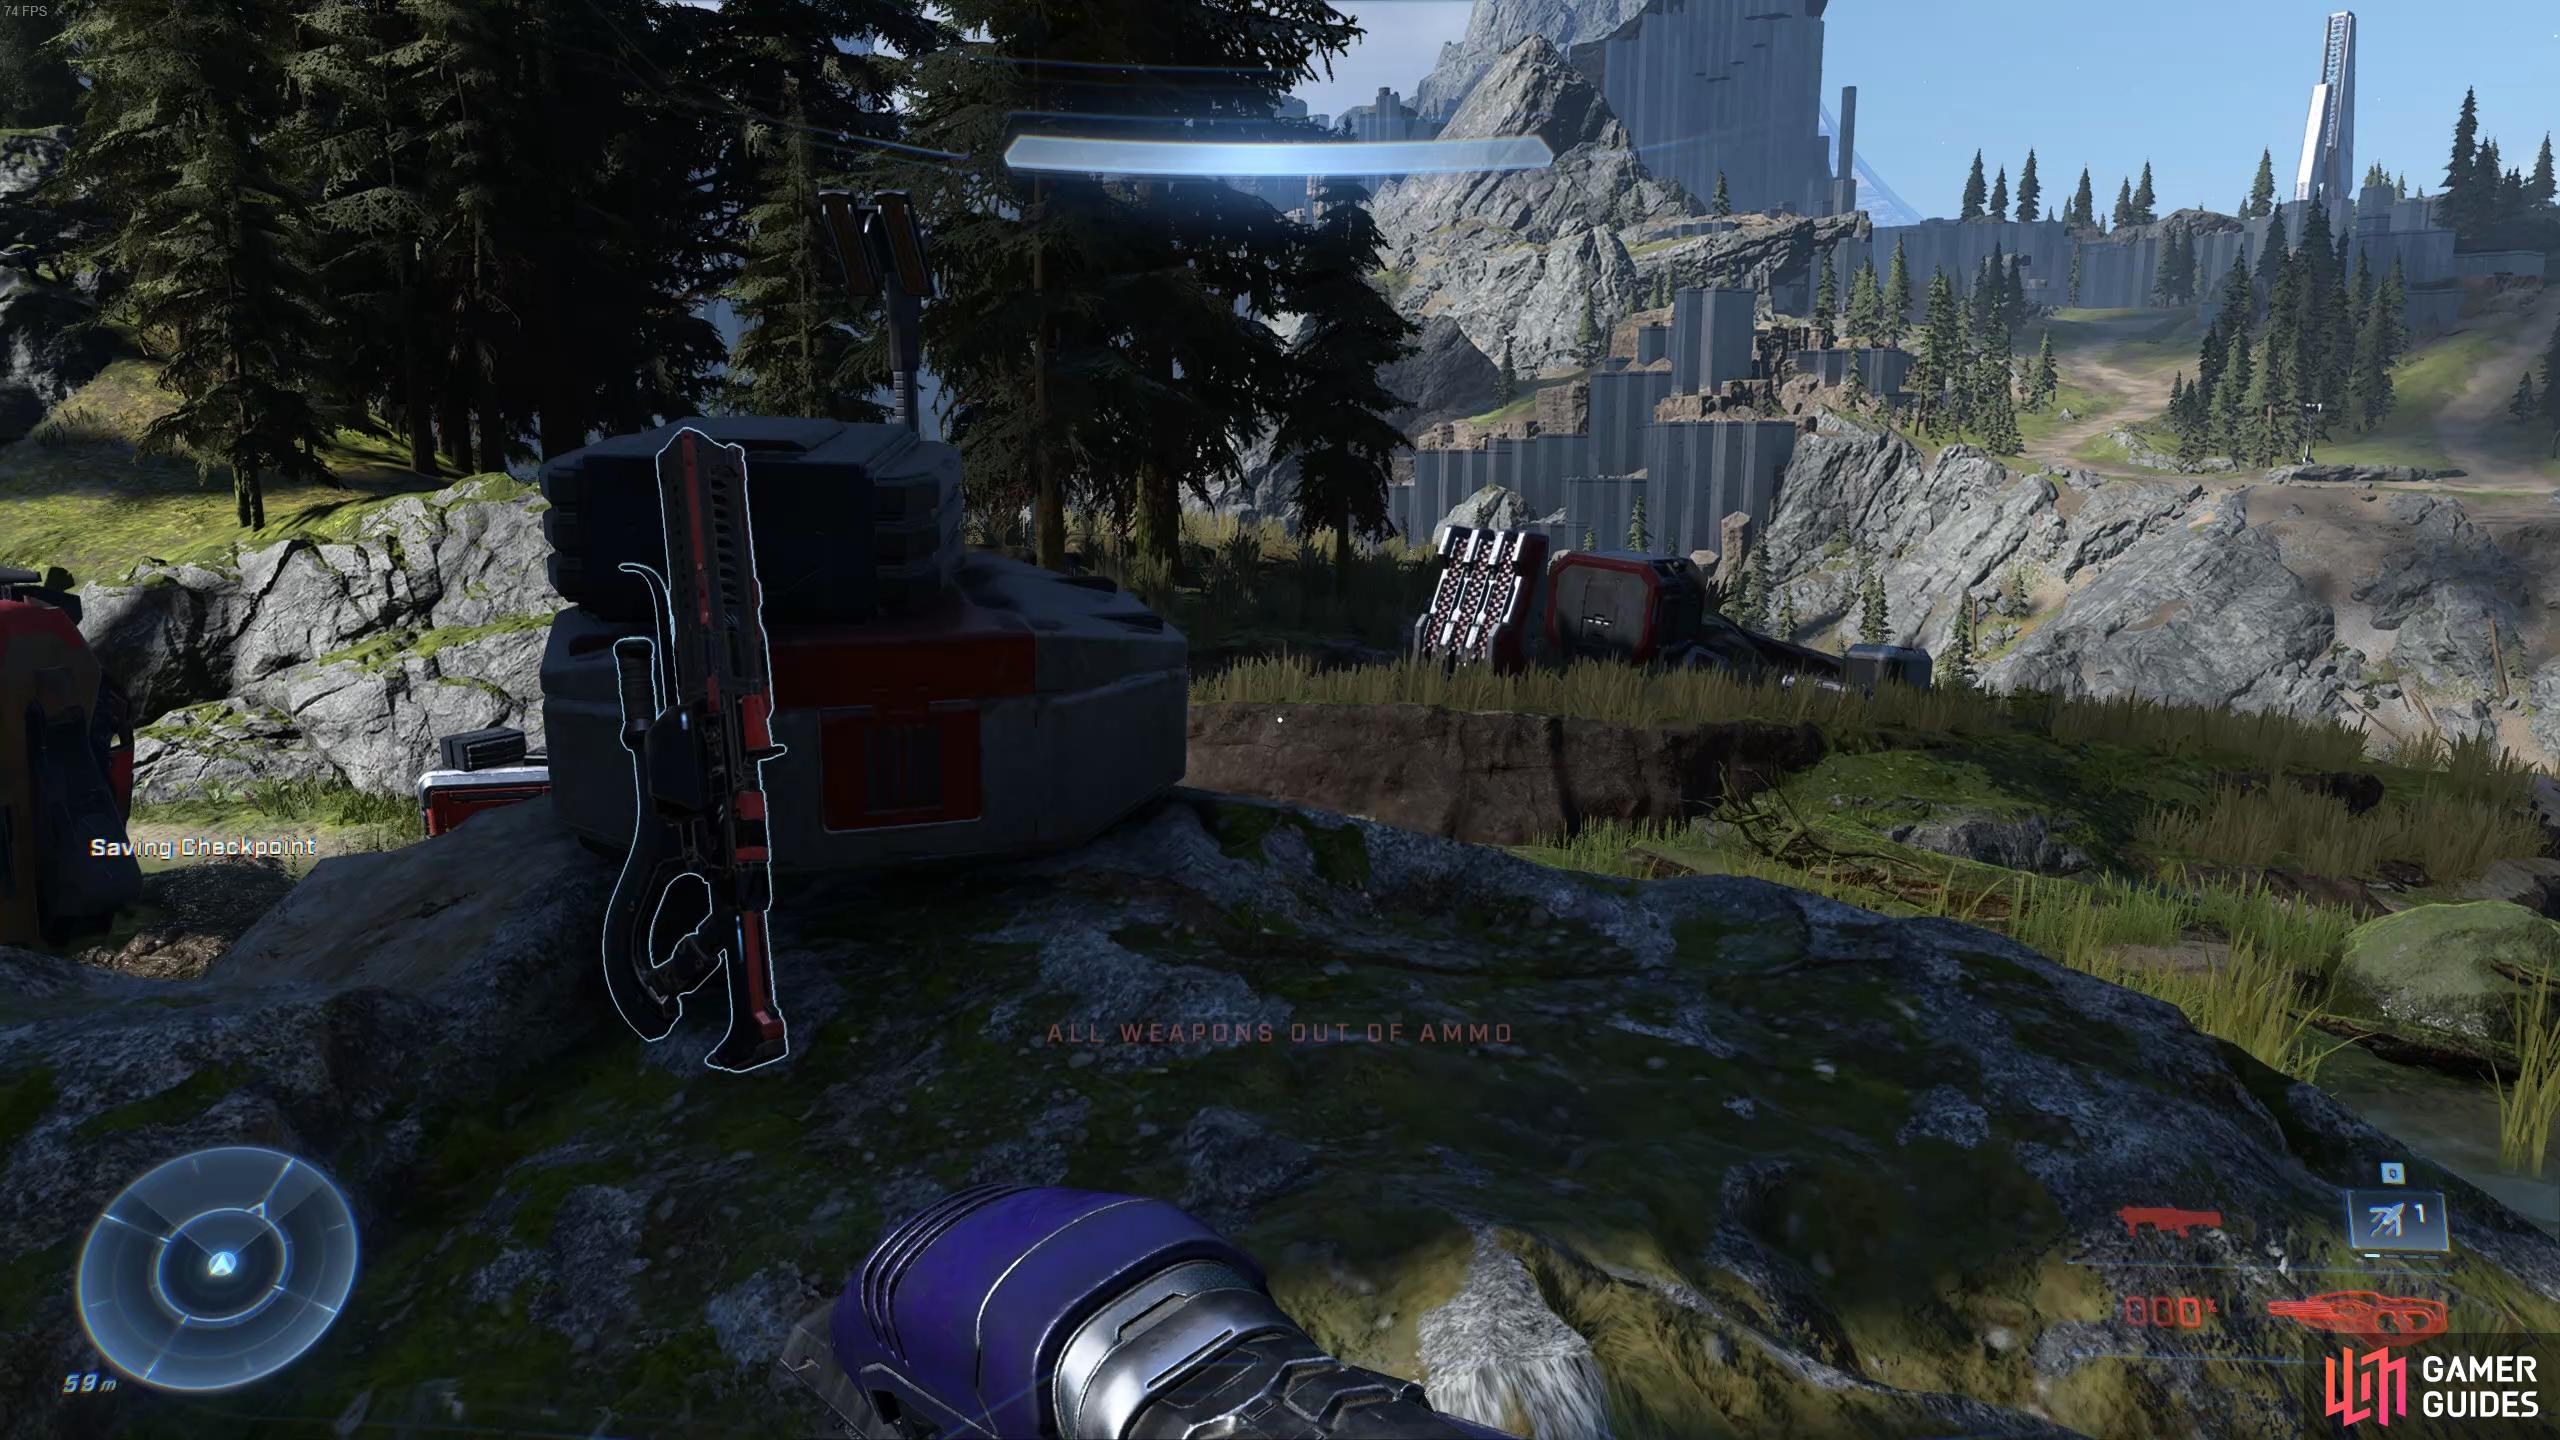 A Shock Rifle can be found on the edge of the area, near the weapon rack.